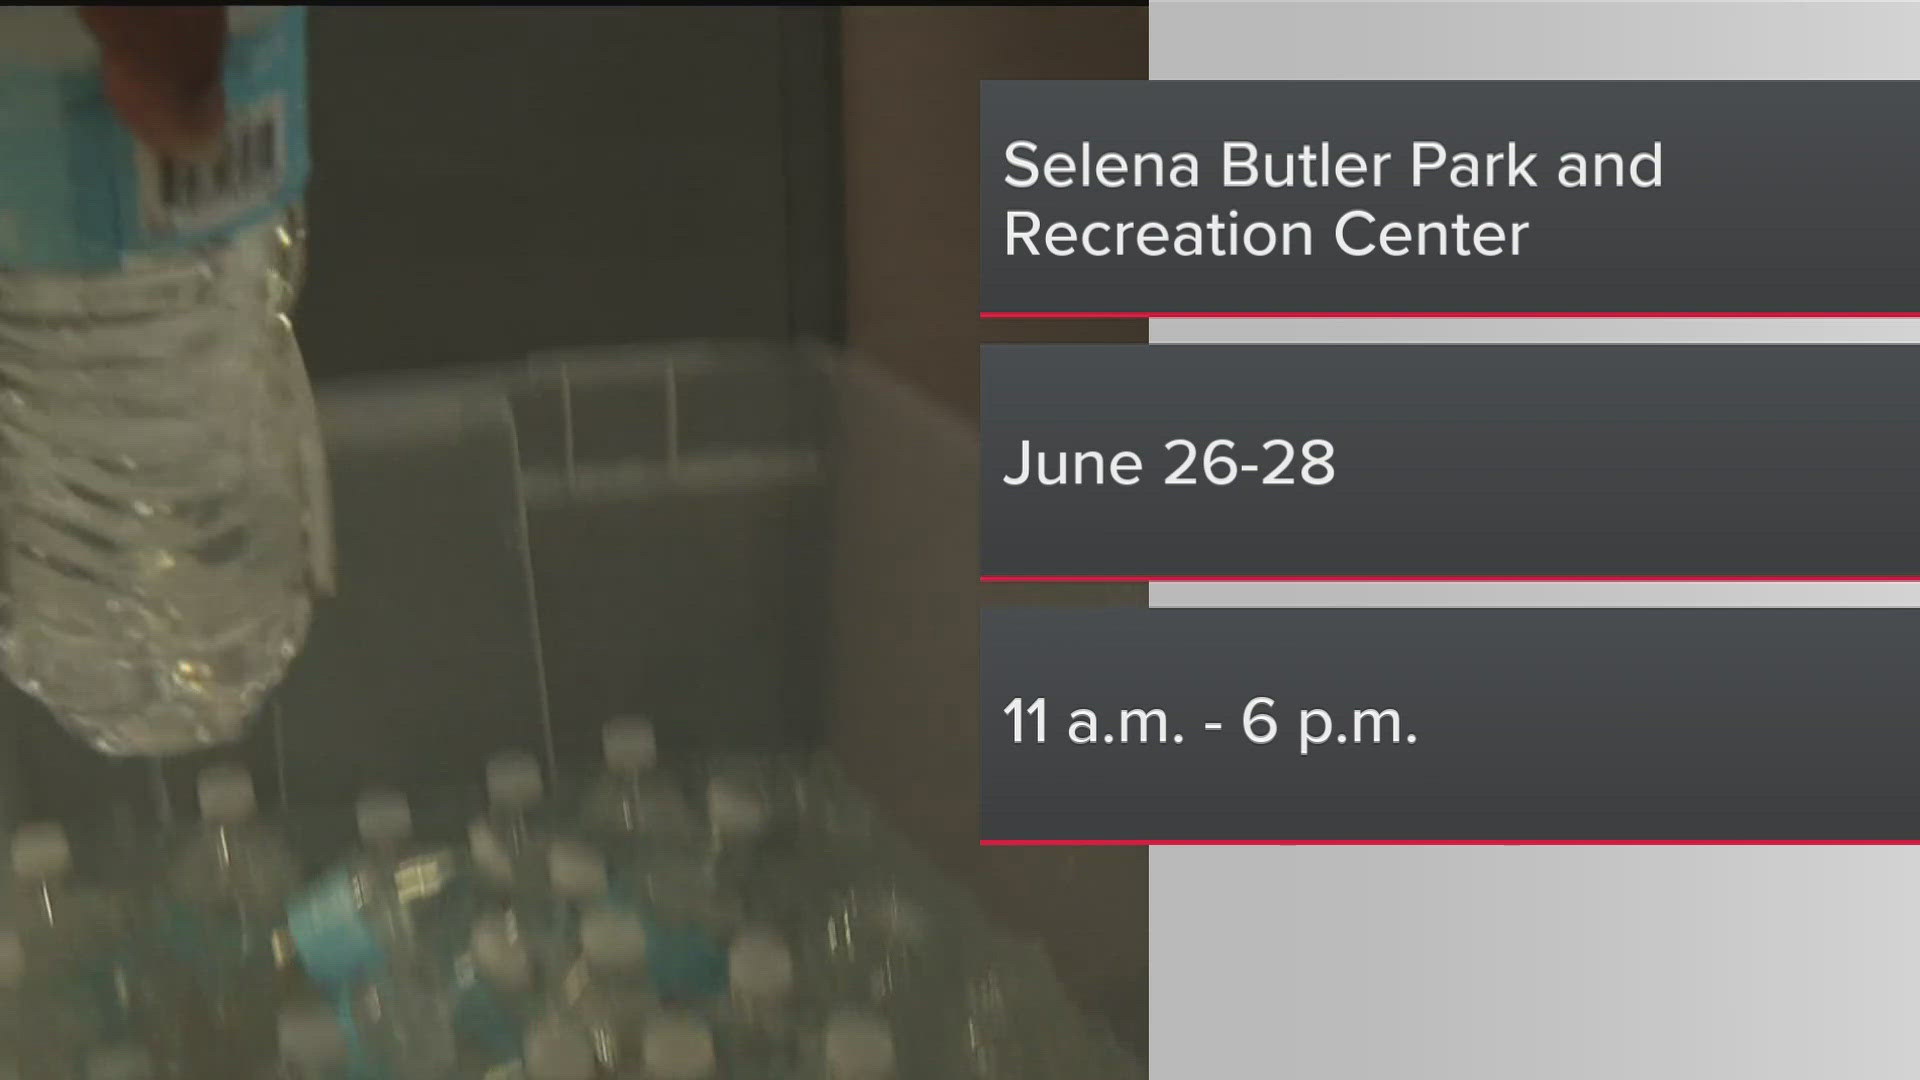 A cooling center is open June 26-28, 11 a.m. - 6 p.m. at the Selena Butler Park and Recreation Center.